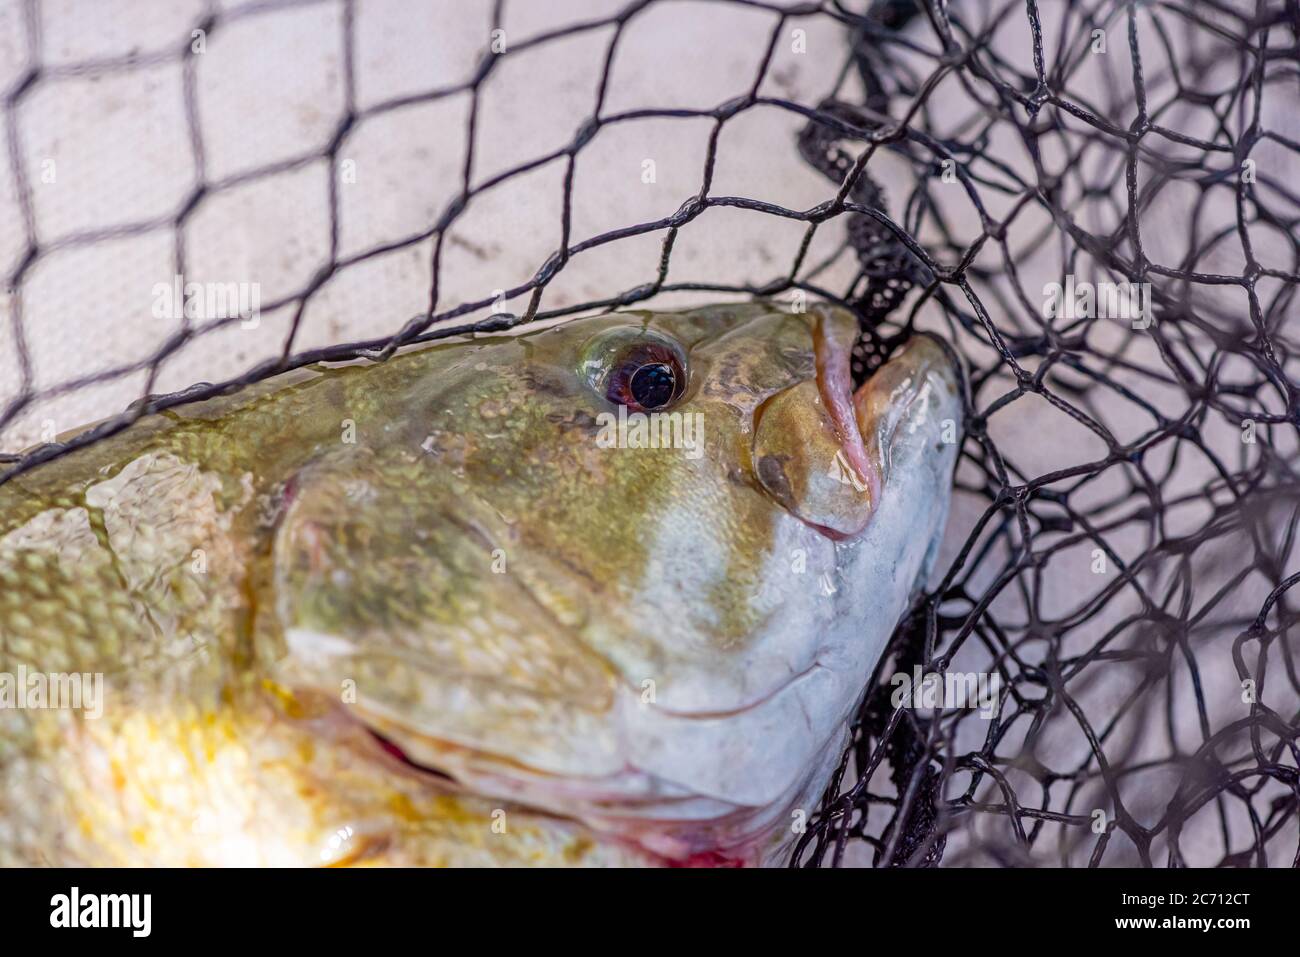 https://c8.alamy.com/comp/2C712CT/closeup-of-a-smallmouth-bass-micropterus-dolomieu-with-fishing-net-in-background-2C712CT.jpg